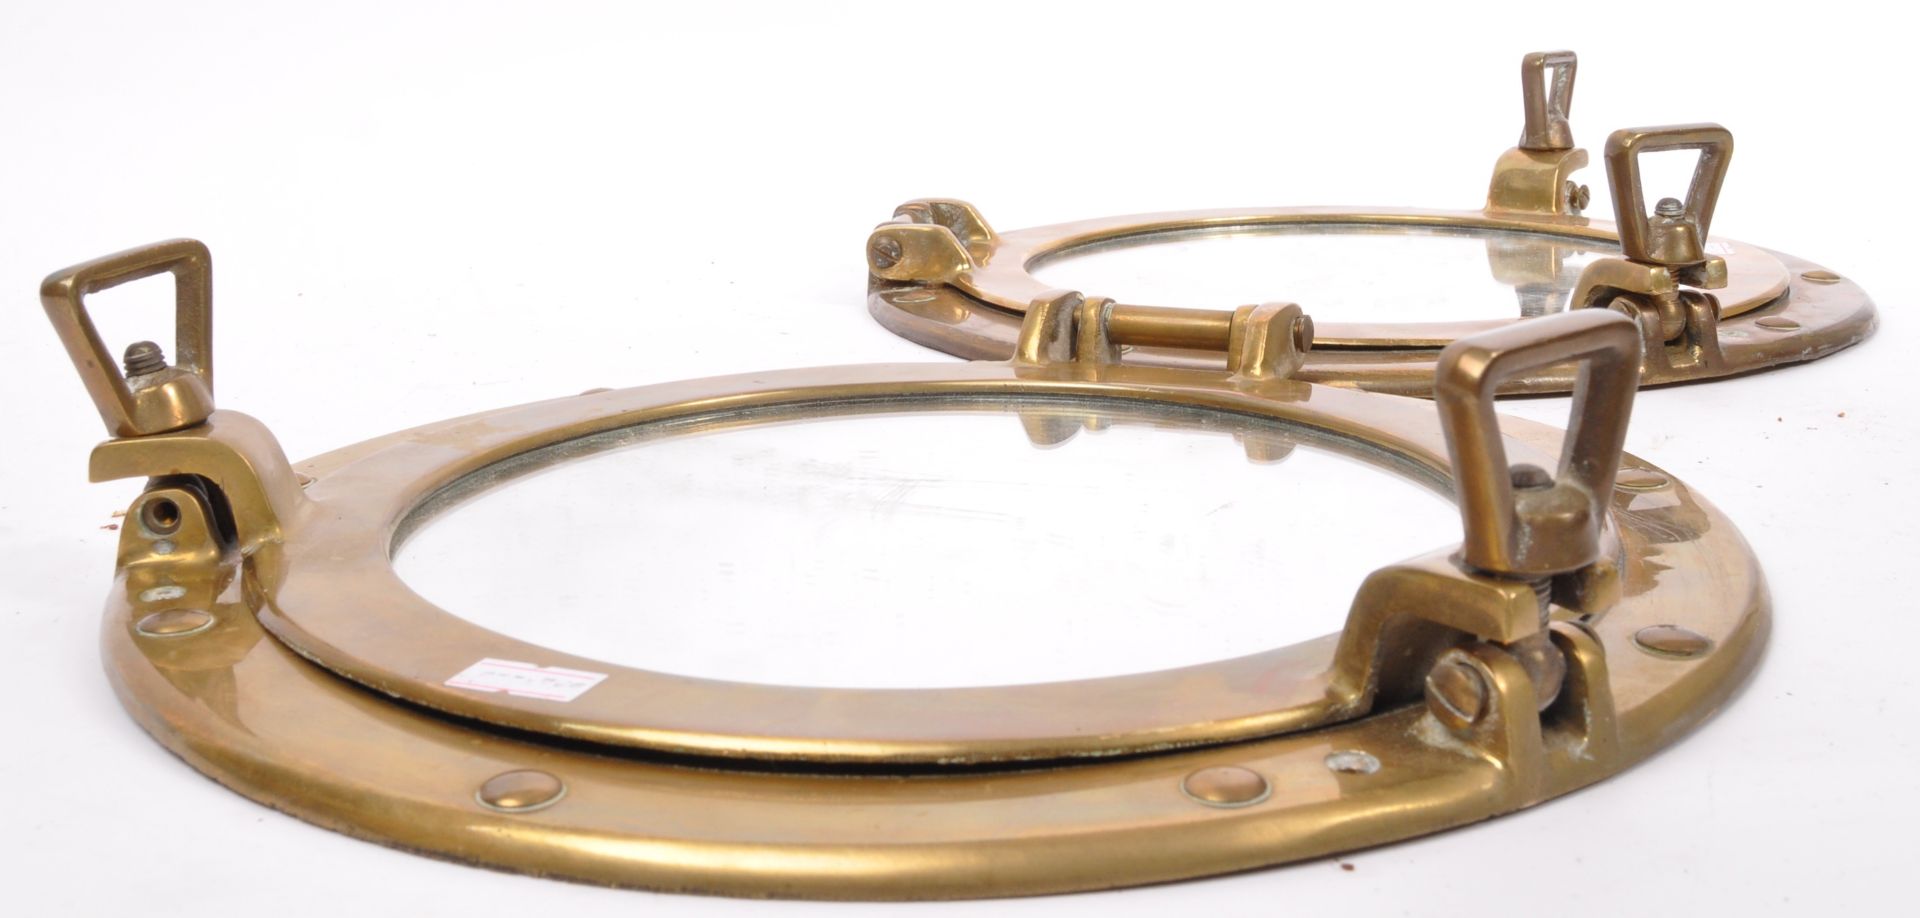 PAIR OF 20TH CENTURY SOLID BRASS SHIPS PORTHOLE MIRRORS - Image 3 of 4